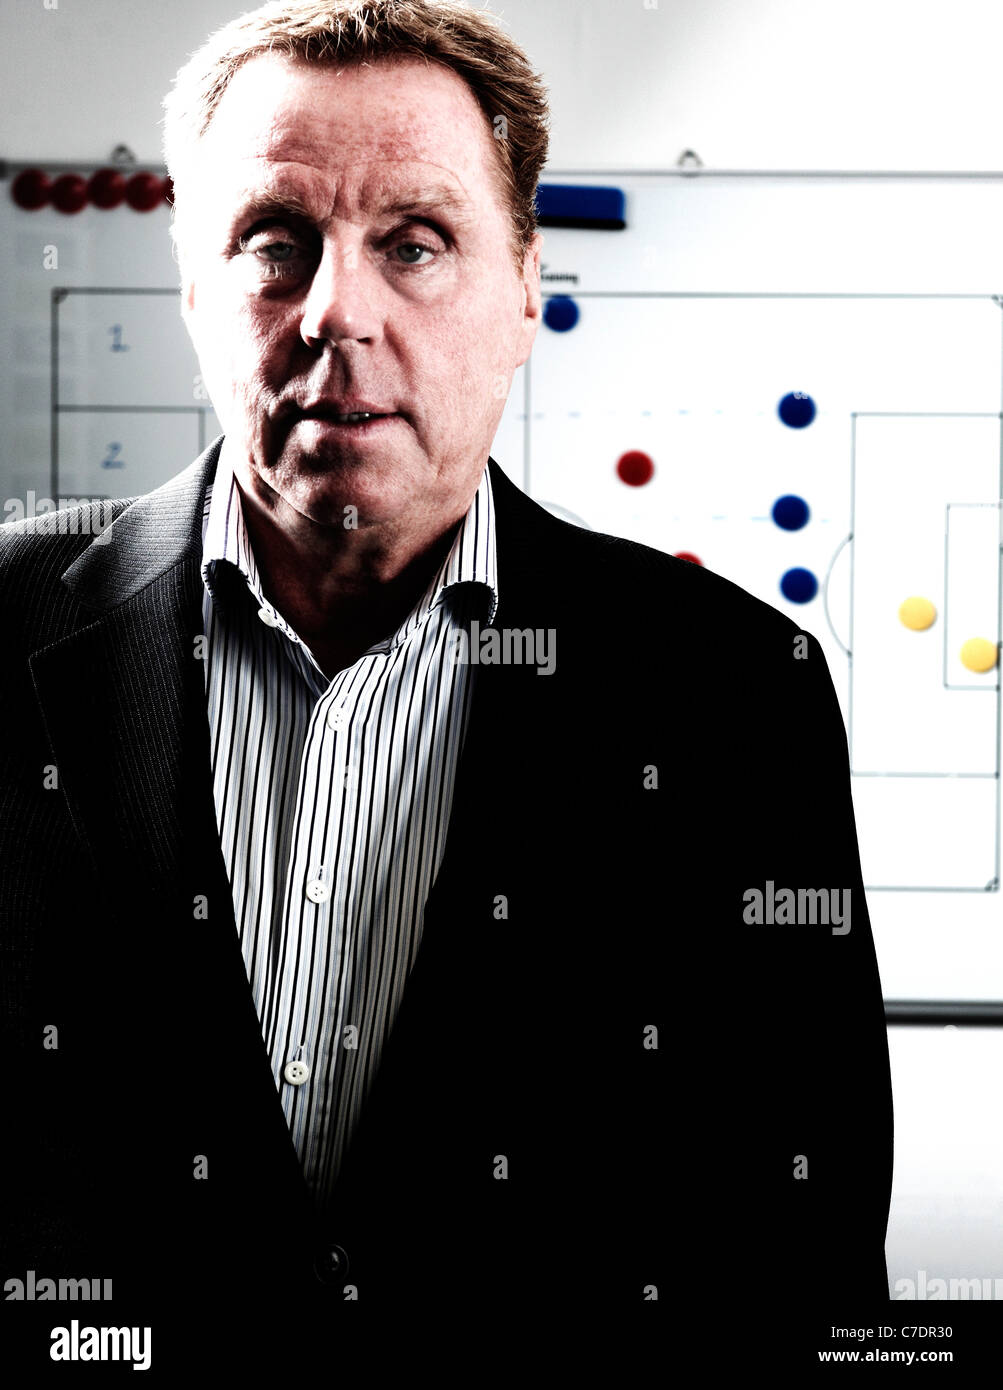 Harry Redknapp in training room premier league manager pundit Stock Photo